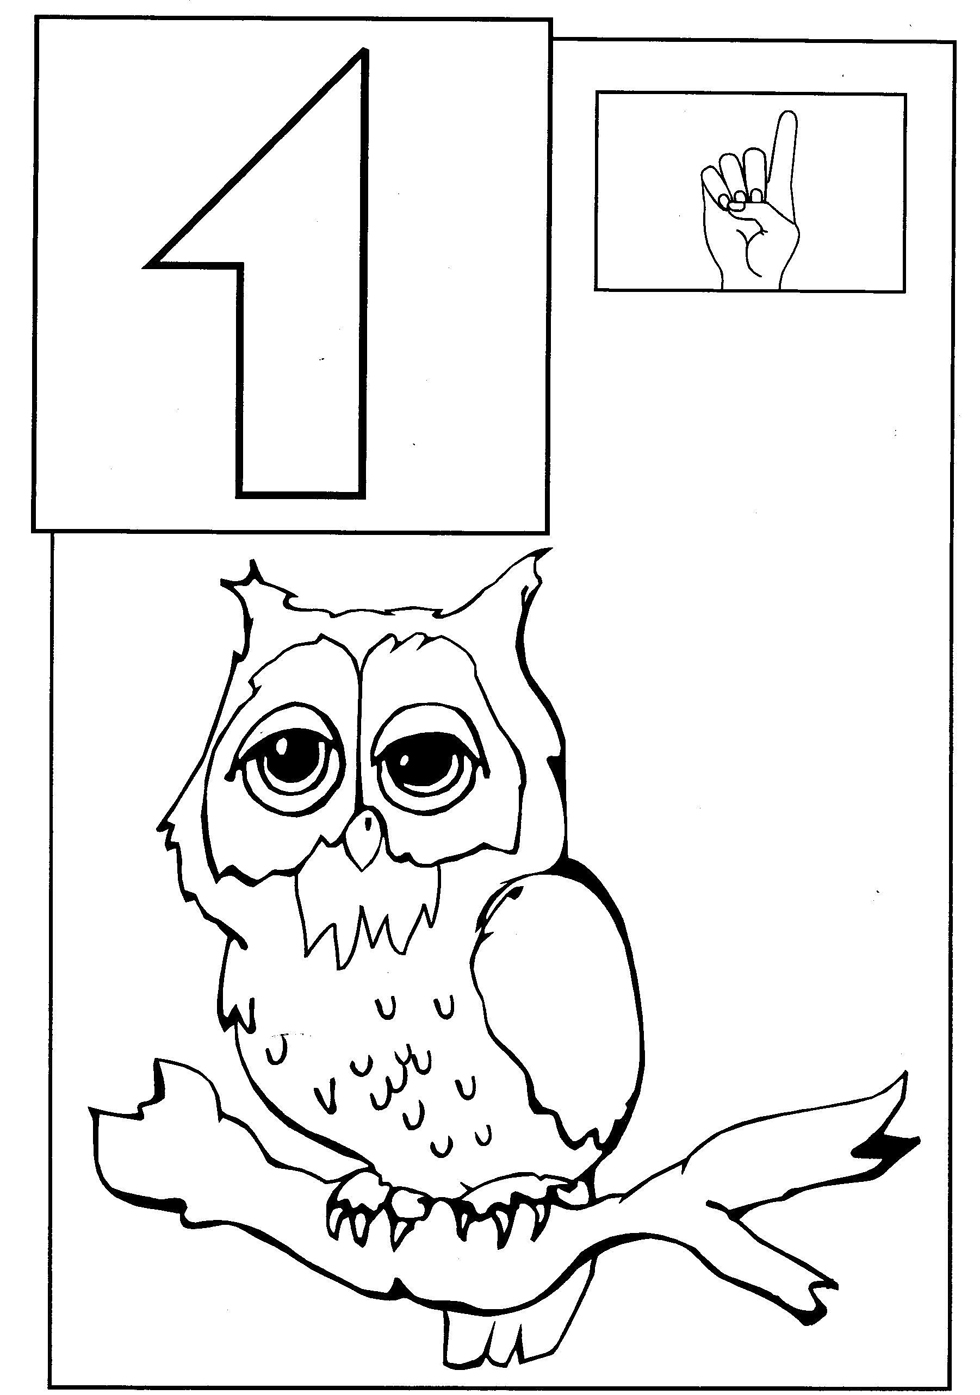 Owl Coloring Page Butterfly Coloring Pages